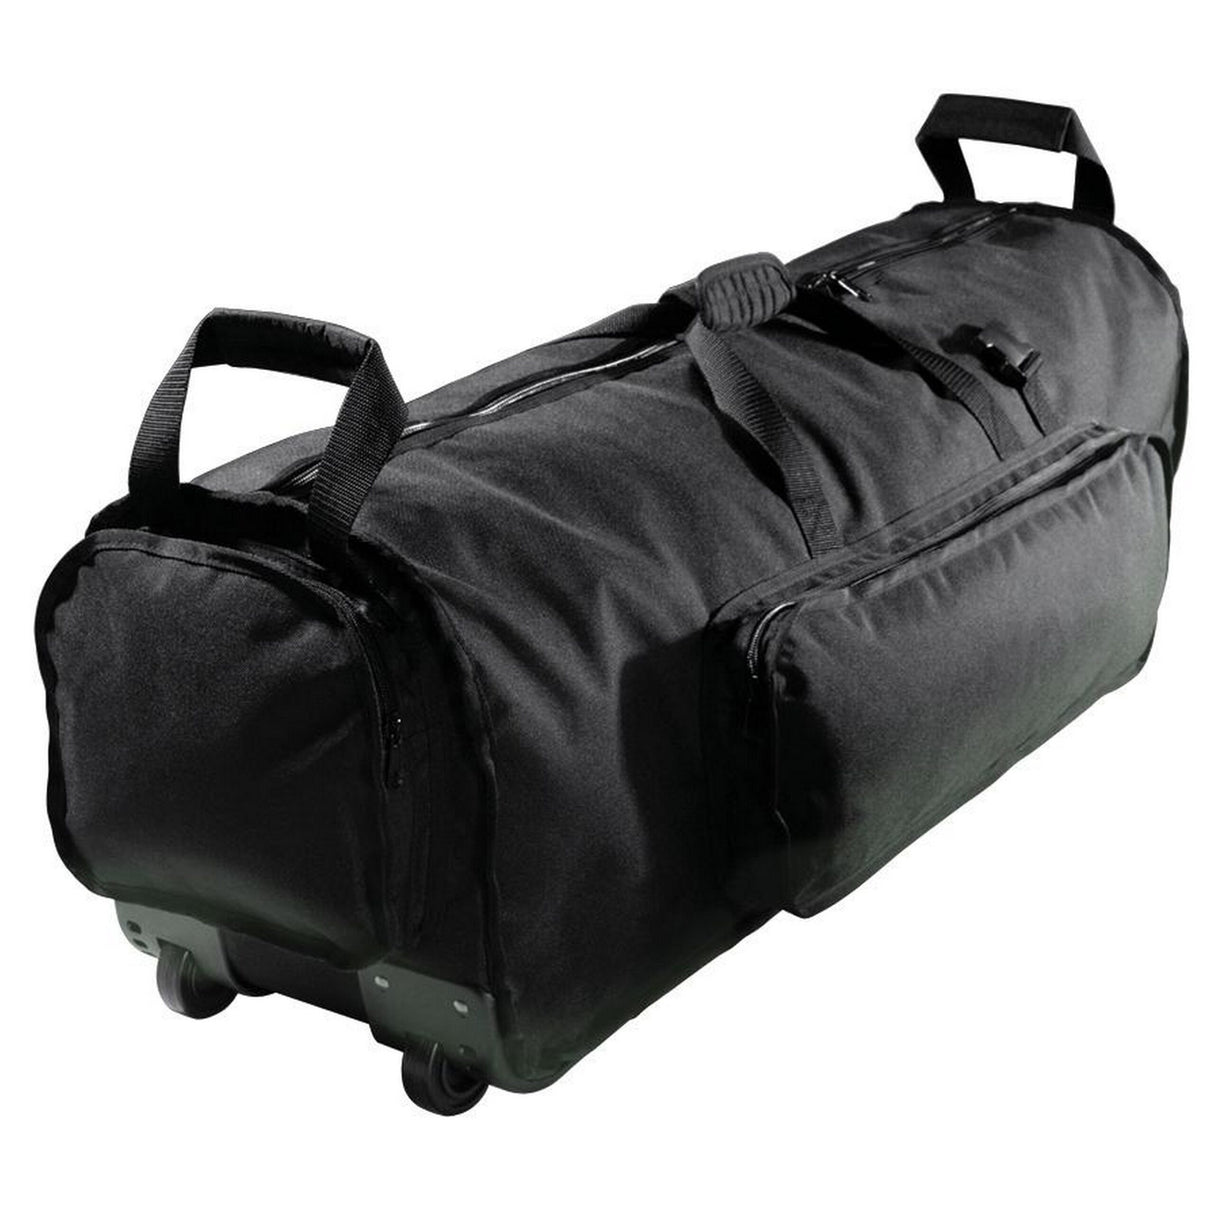 Kaces KPHD-46W Pro Drum Hardware Bag - 46-Inch with Wheels